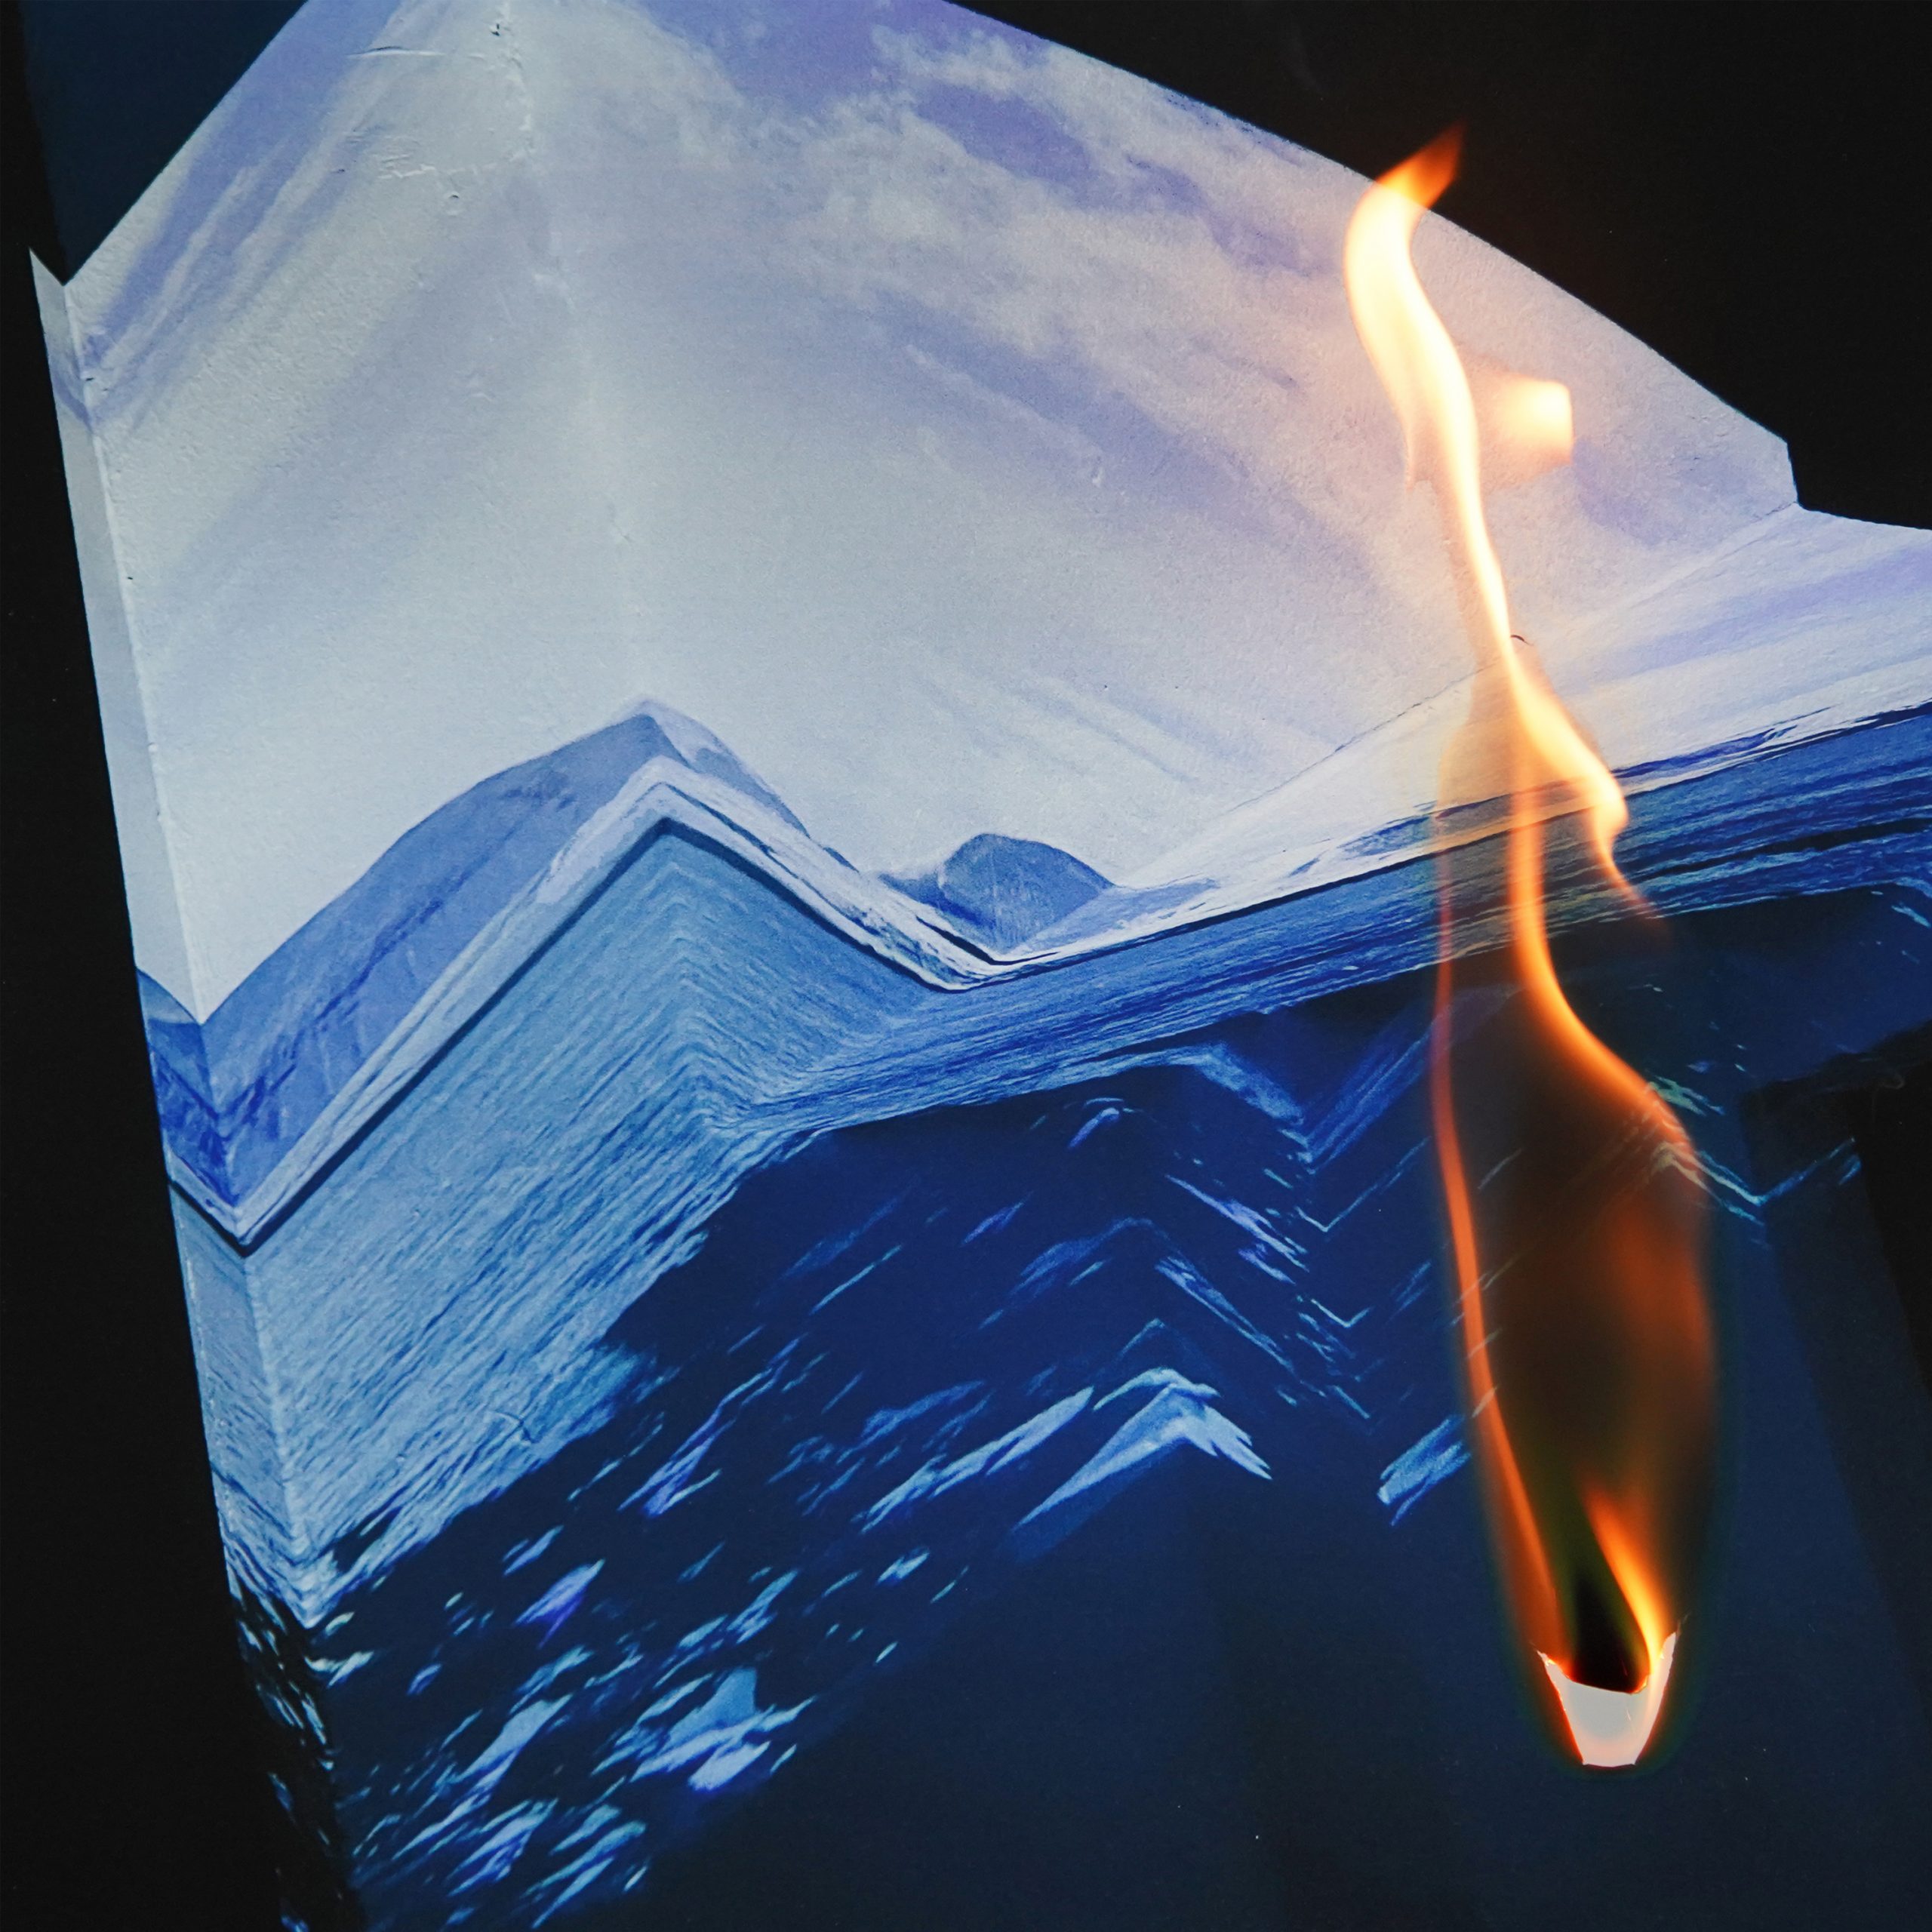 A folded image of an iceberg on fire.